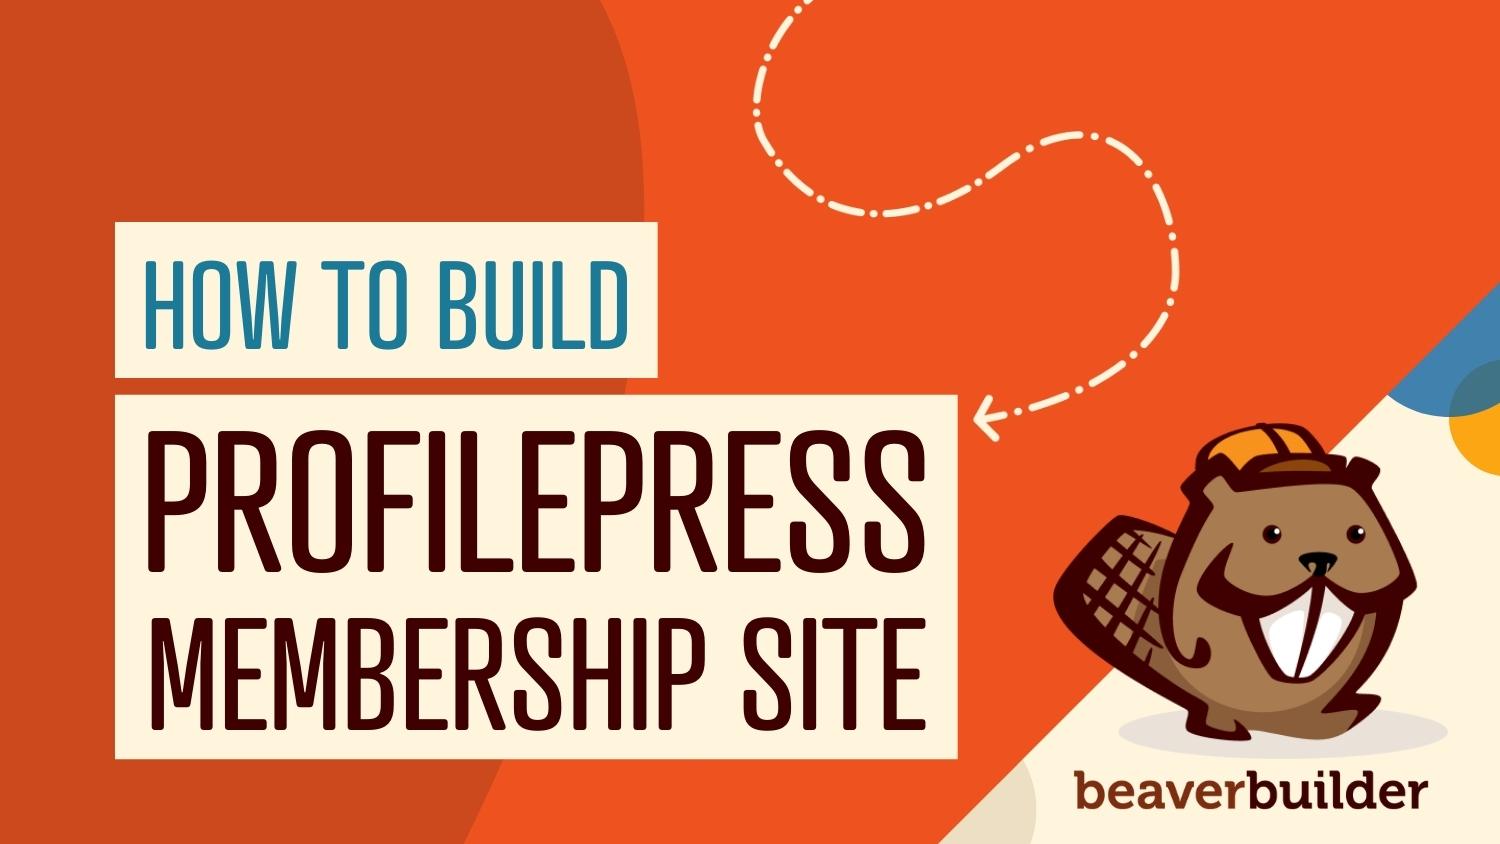 How to build a paid membership site using ProfilePress and Beaver Builder